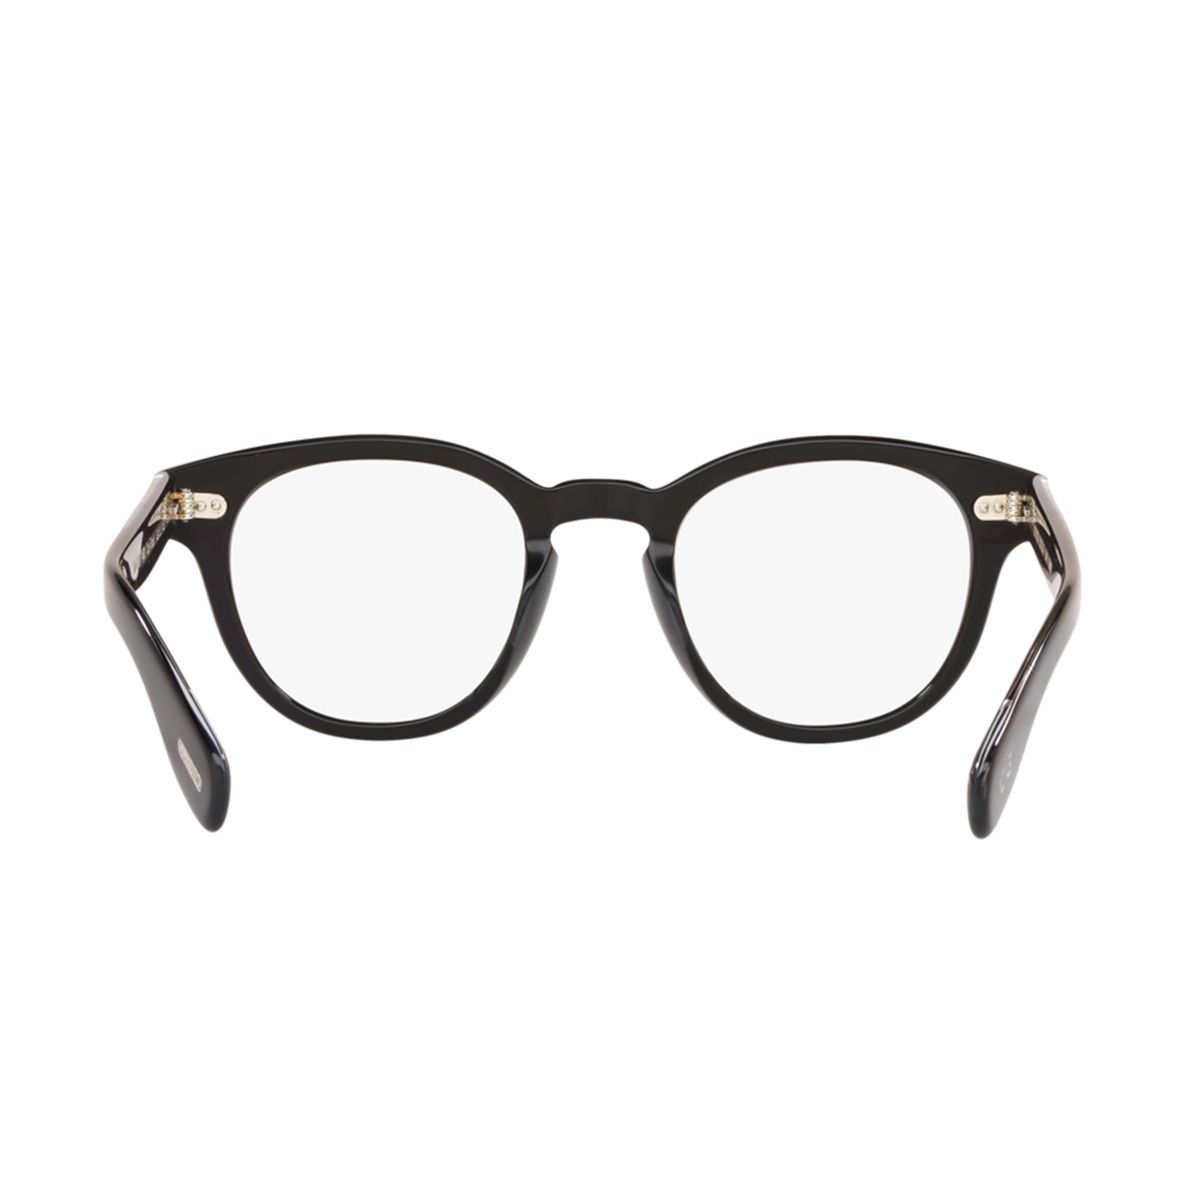 OLIVER PEOPLES CARY CRANT 保証書付き